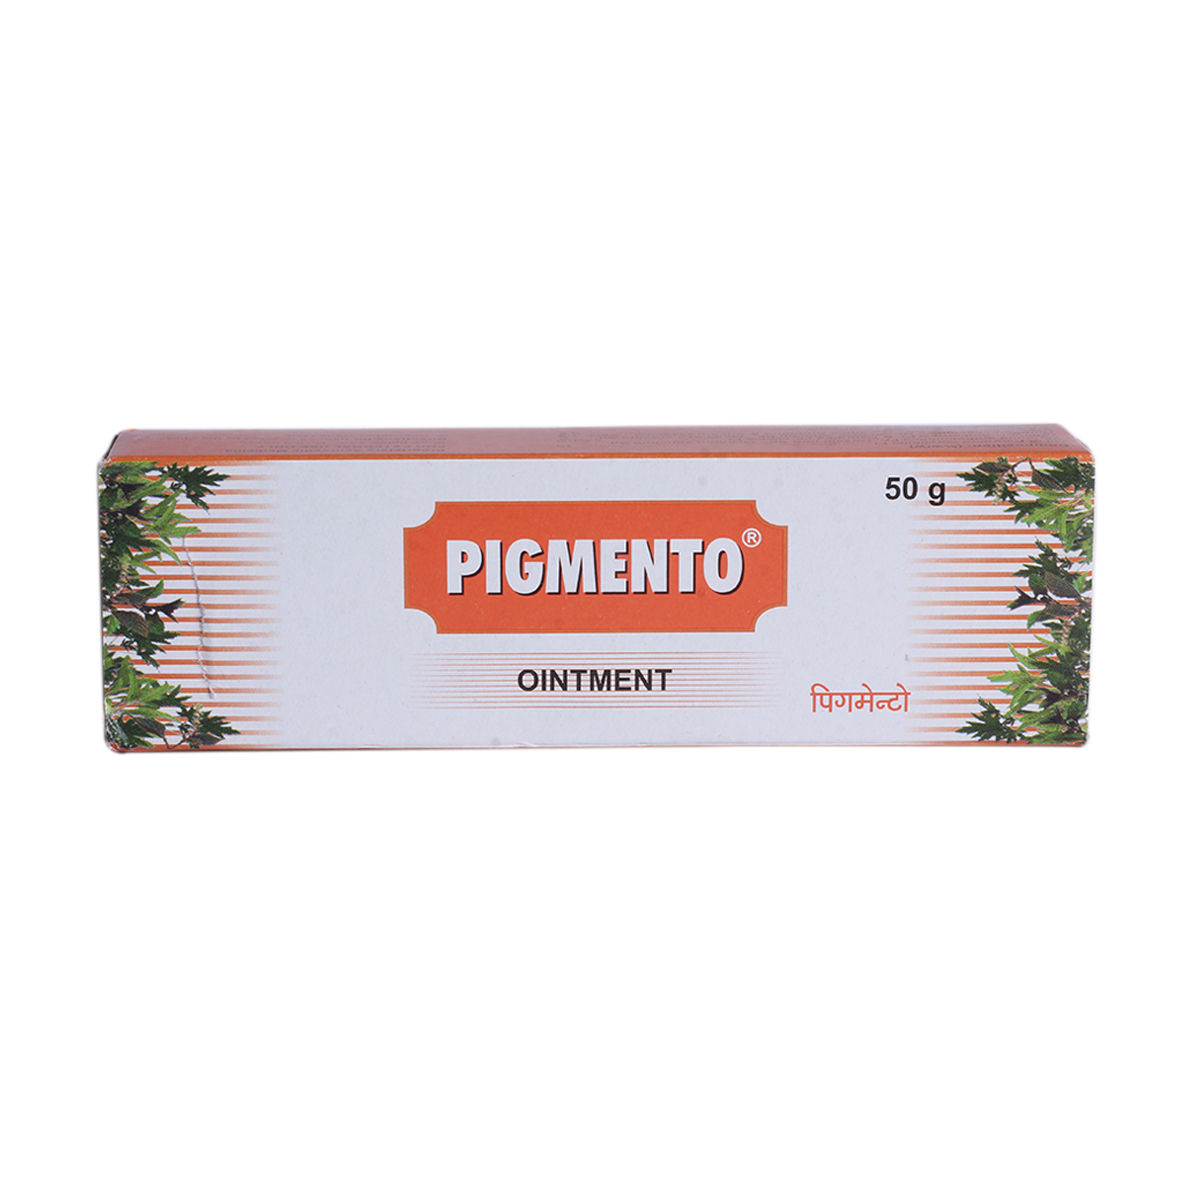 Pigmento Ointment | Uses, Side Effects, Price | Apollo Pharmacy